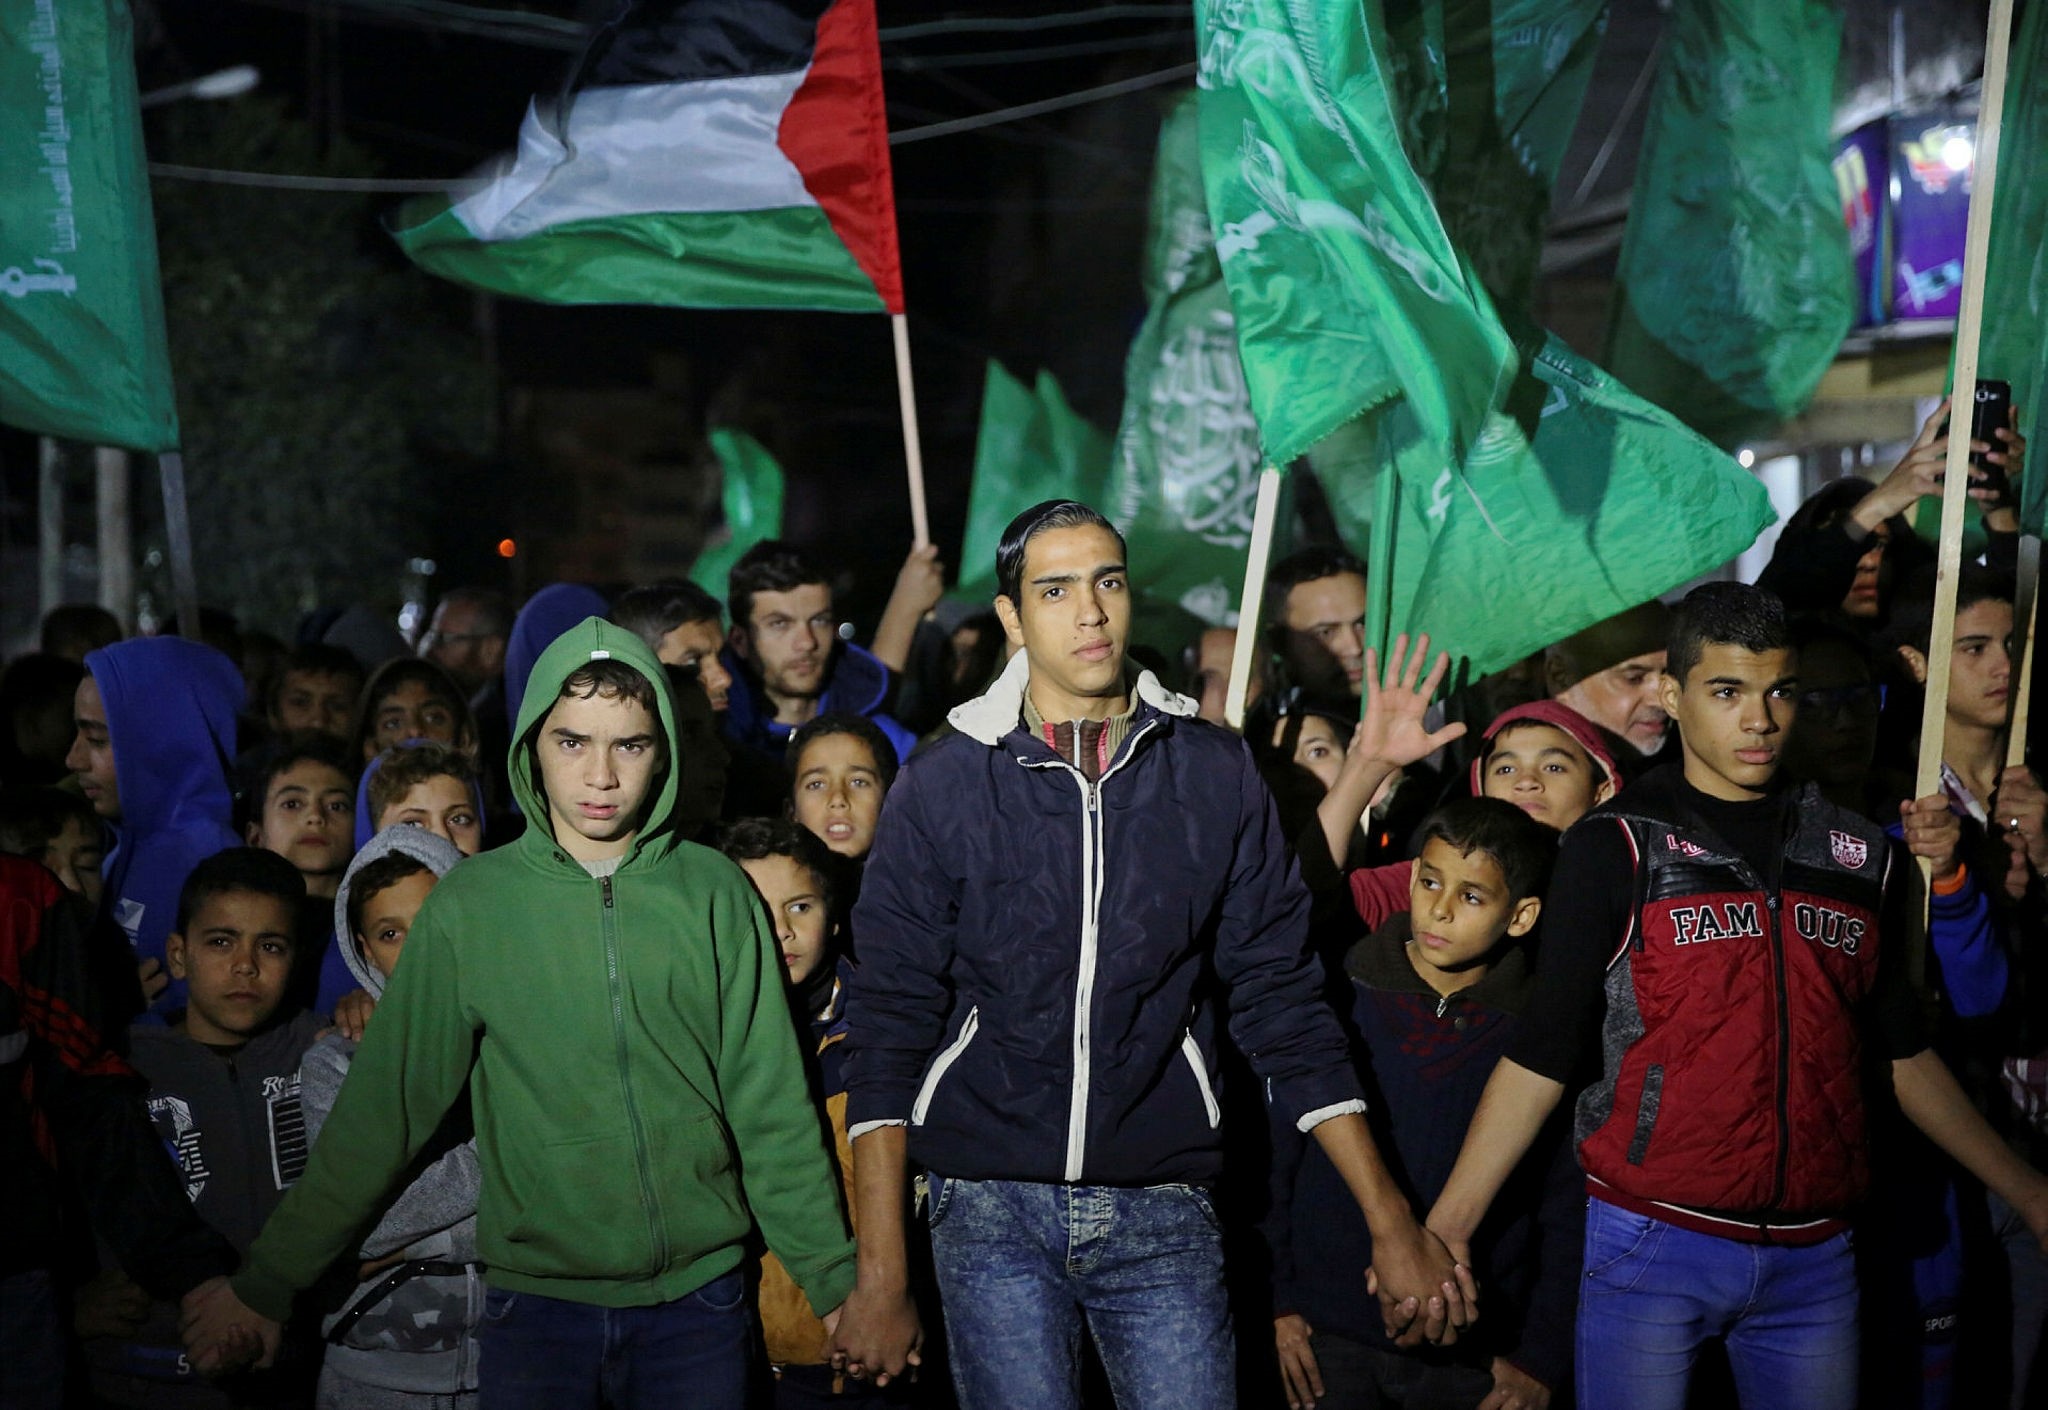 Supporters of Palestinian resistance group Hamas wave their green flags during a protest against the possible U.S. decision to recognize Jerusalem as Israel's capital, in Jebaliya Refugee Camp, Gaza Strip, Wednesday, Dec. 6, 2017. (AP Photo)